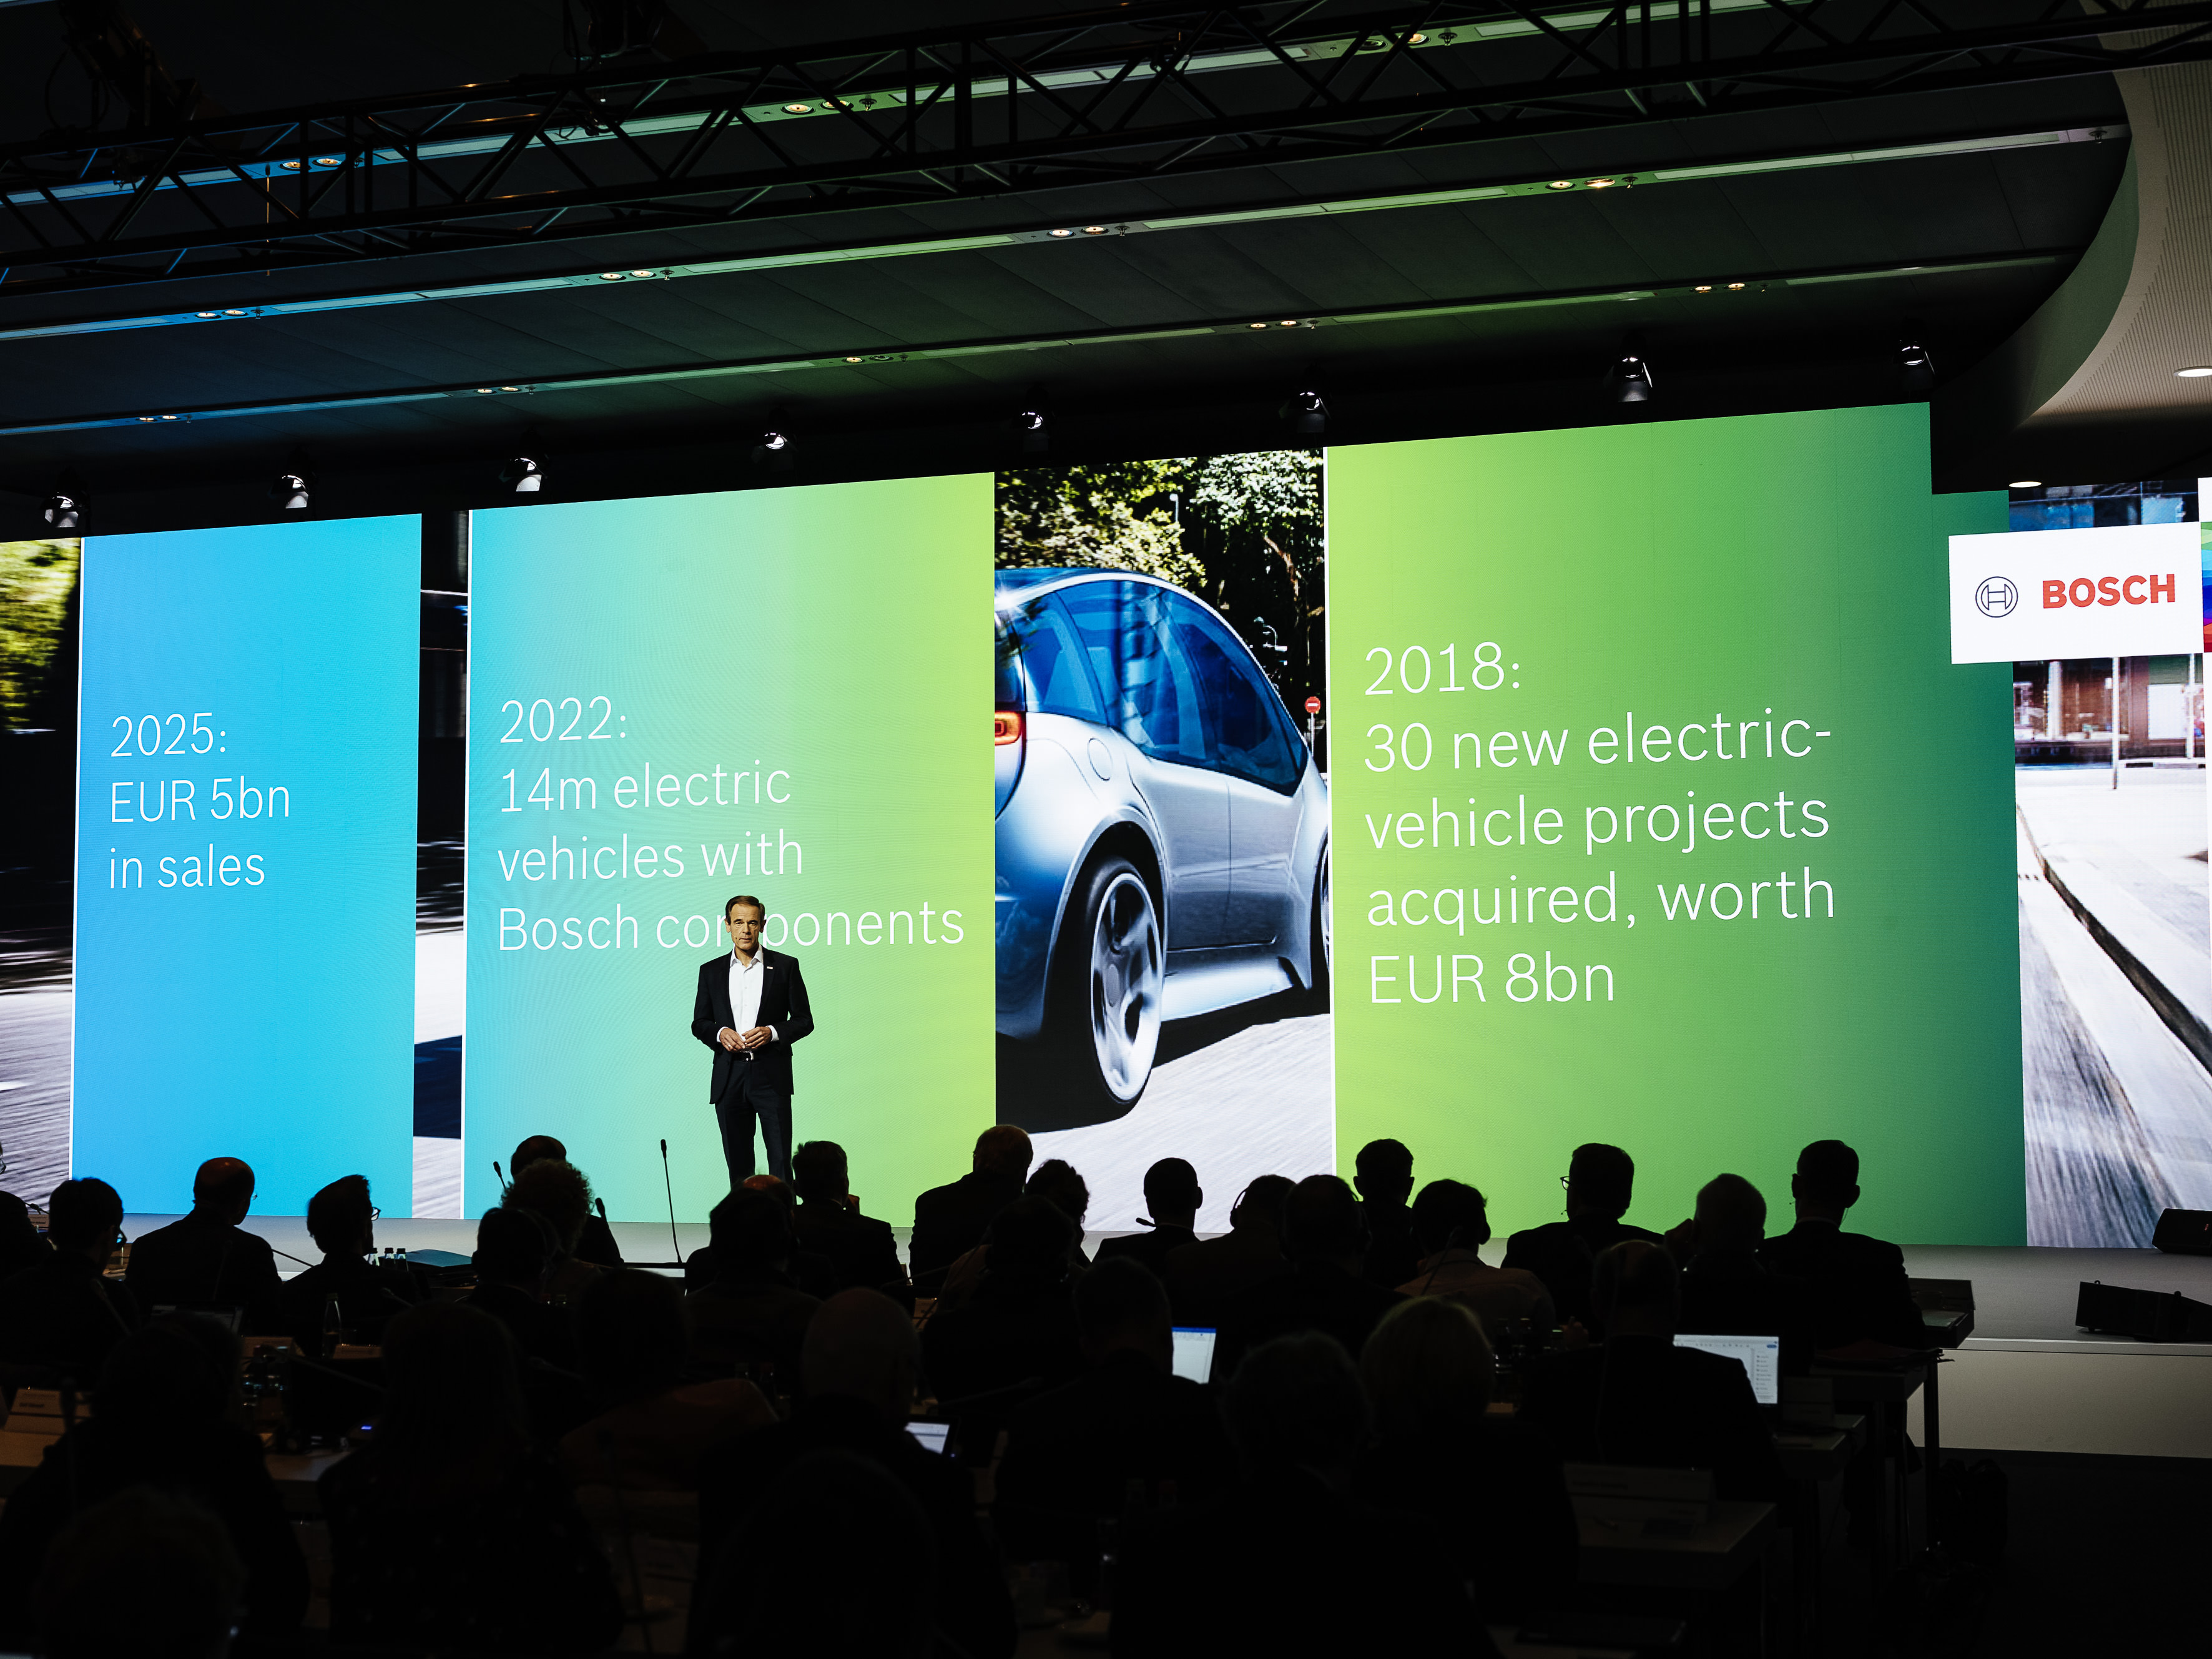 Annual press conference 2019: Bosch to be carbon neutral worldwide by 2020